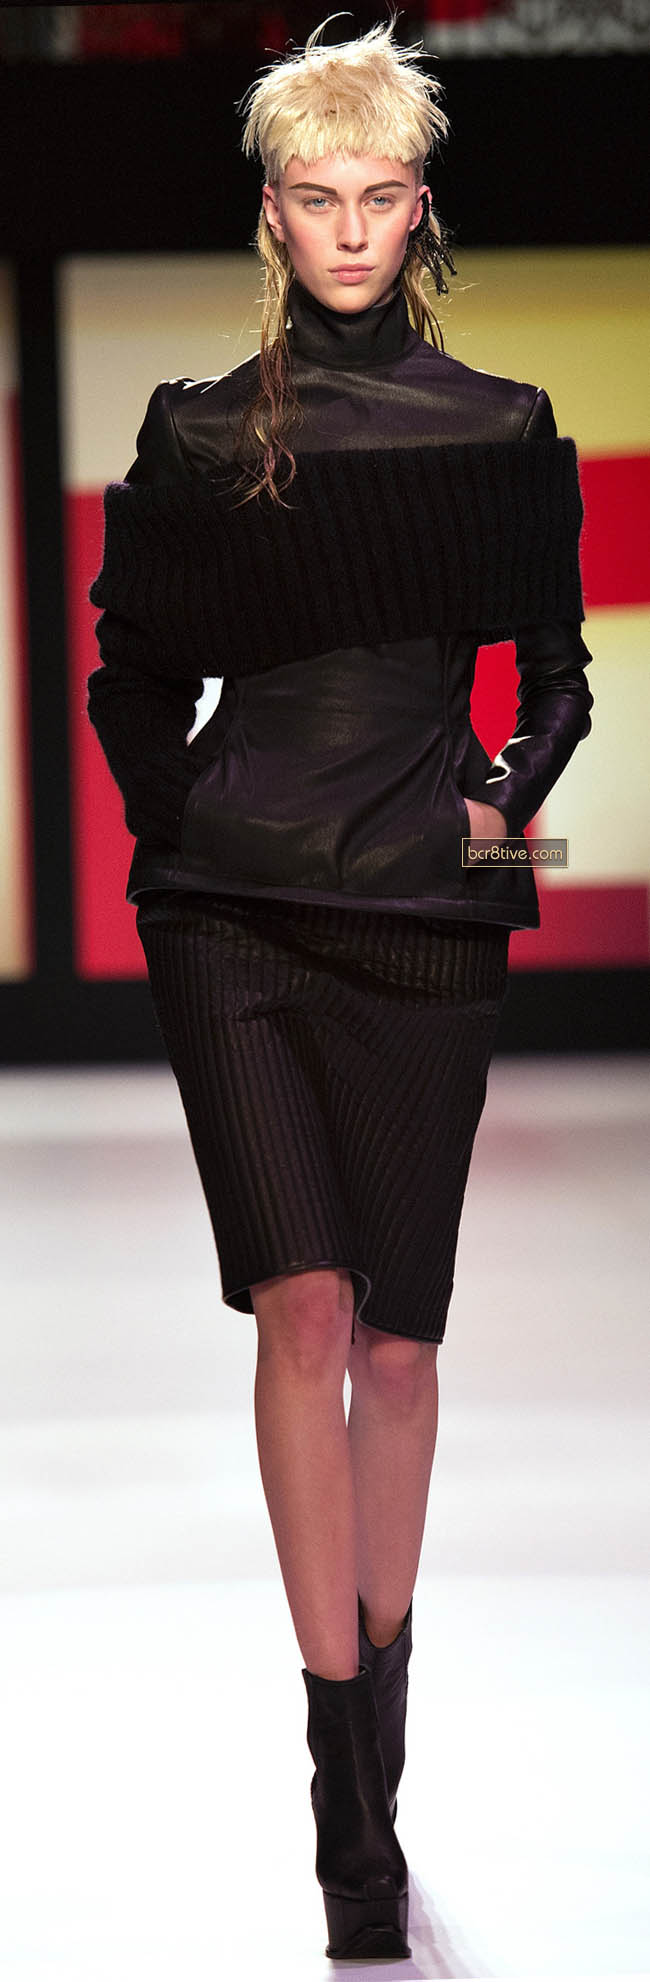 Jean Paul Gaultier Fall Winter 2013-14 Collection – Be Creative